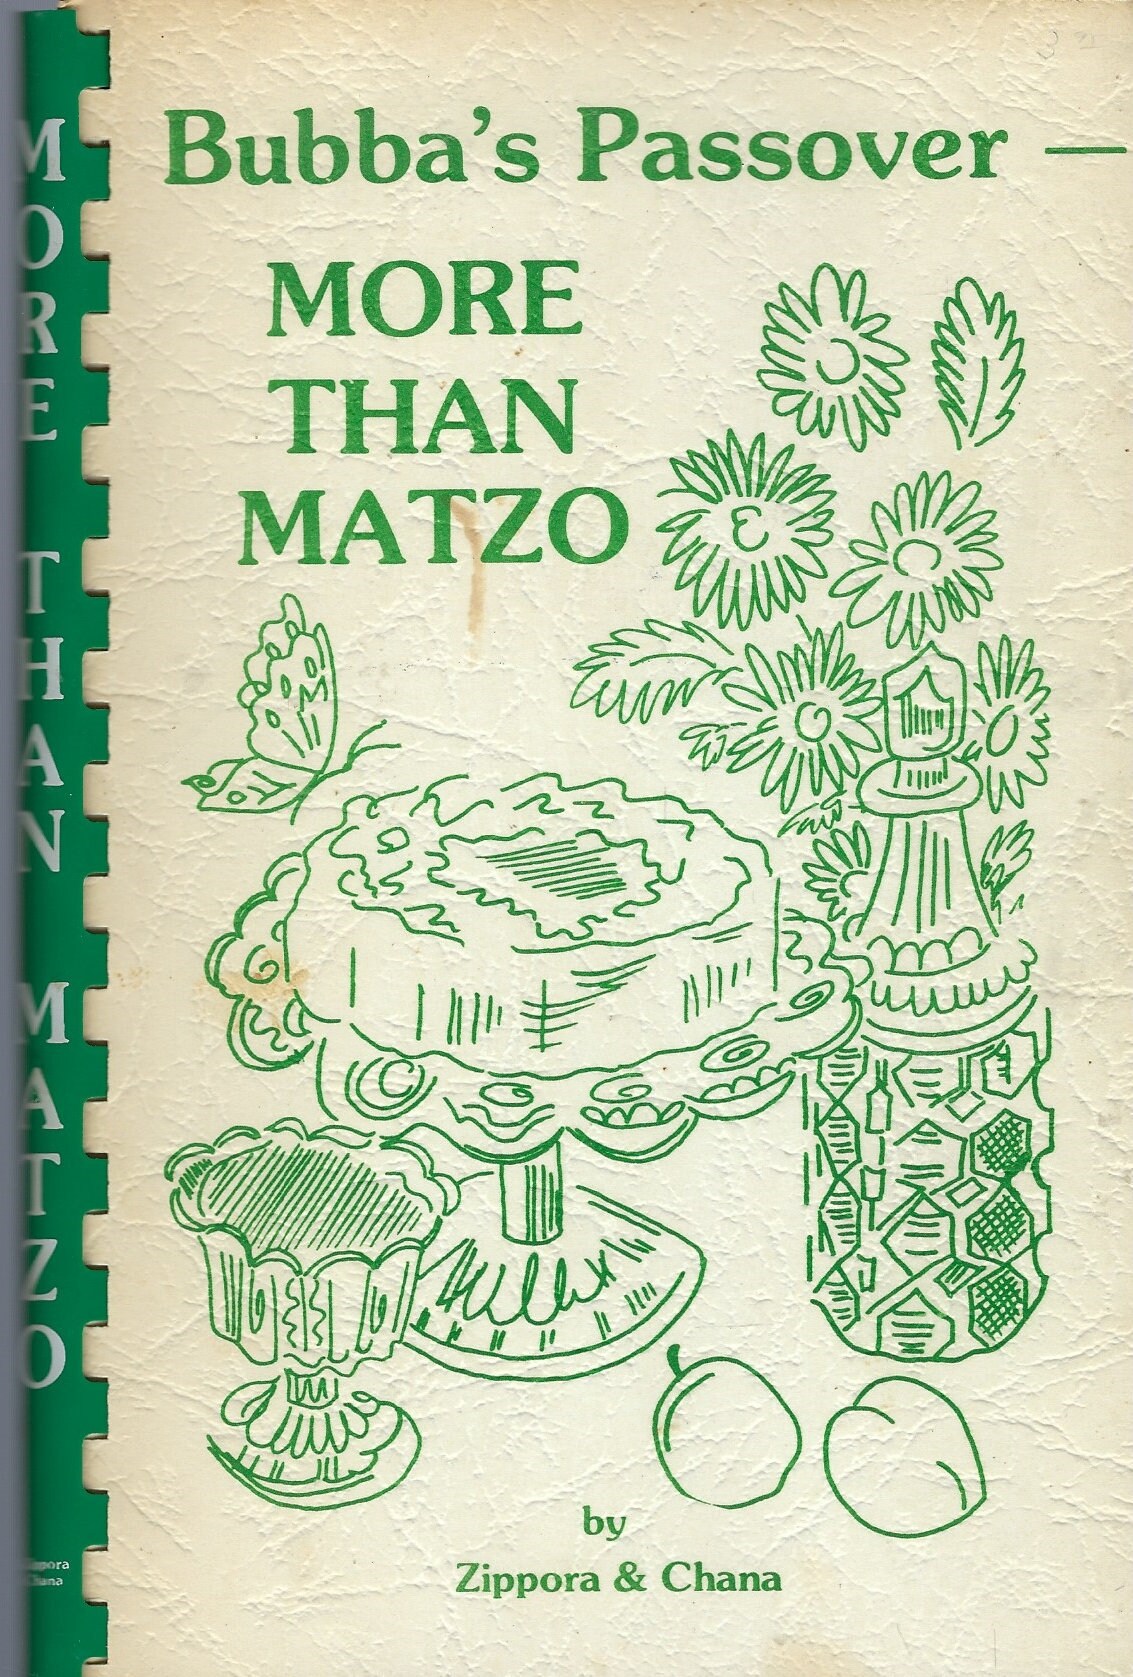 Bubba's Passover - More Than Matzo Vintage 1978 Ethnic Jewish Cookbook By Zippora & Chana Favorite Recipes Collectible Rare Cook Book